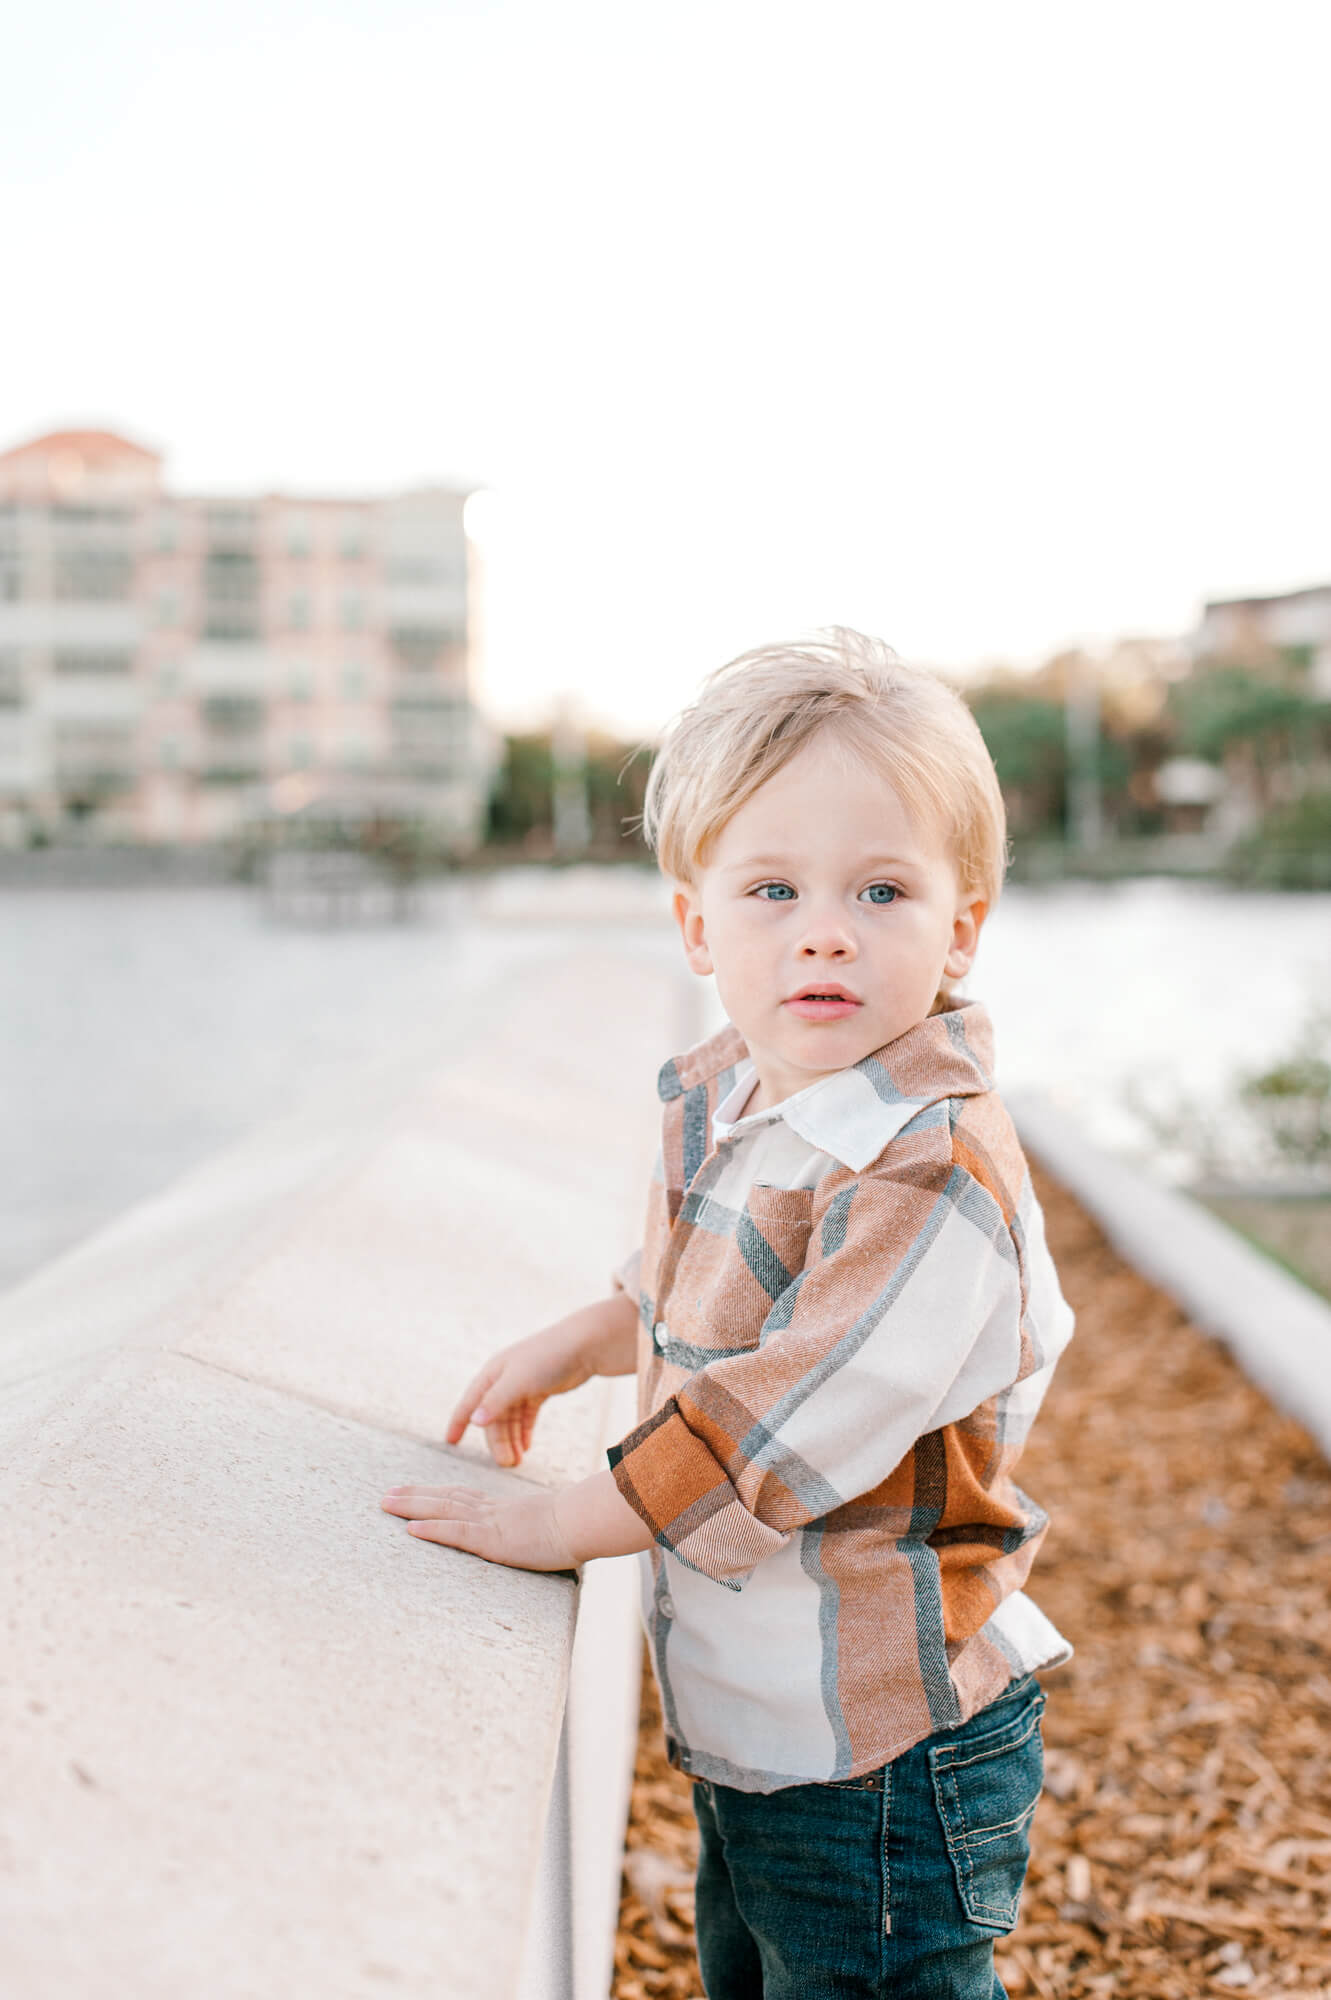 The sweetest boy standing by water near Coral Reef Academy looking over his shoulder during a family photoshoot.